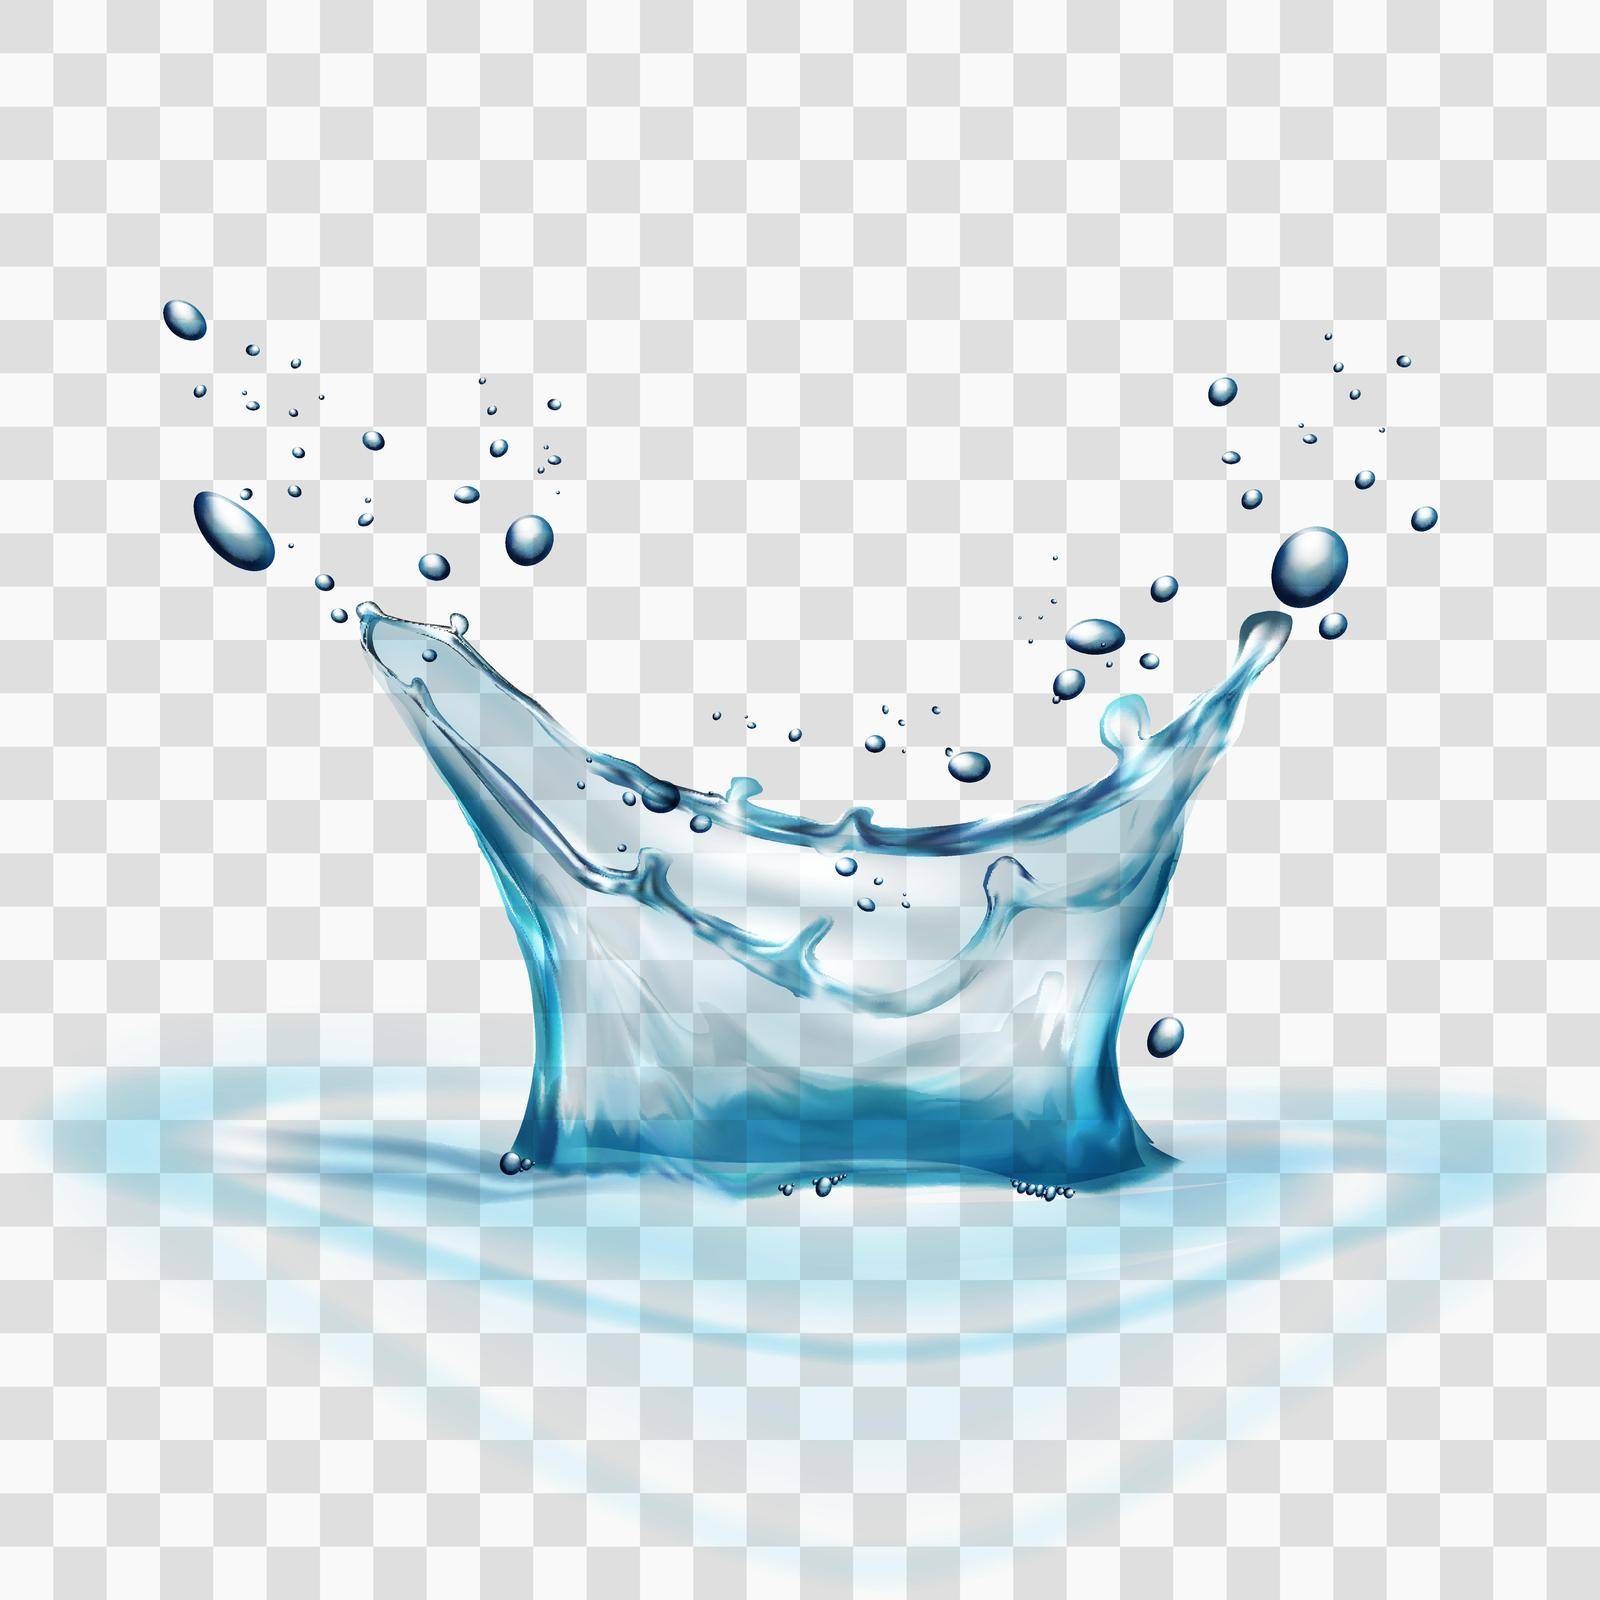 Transparent Water Splash Isolated On Transparent Background. EPS10 Vector